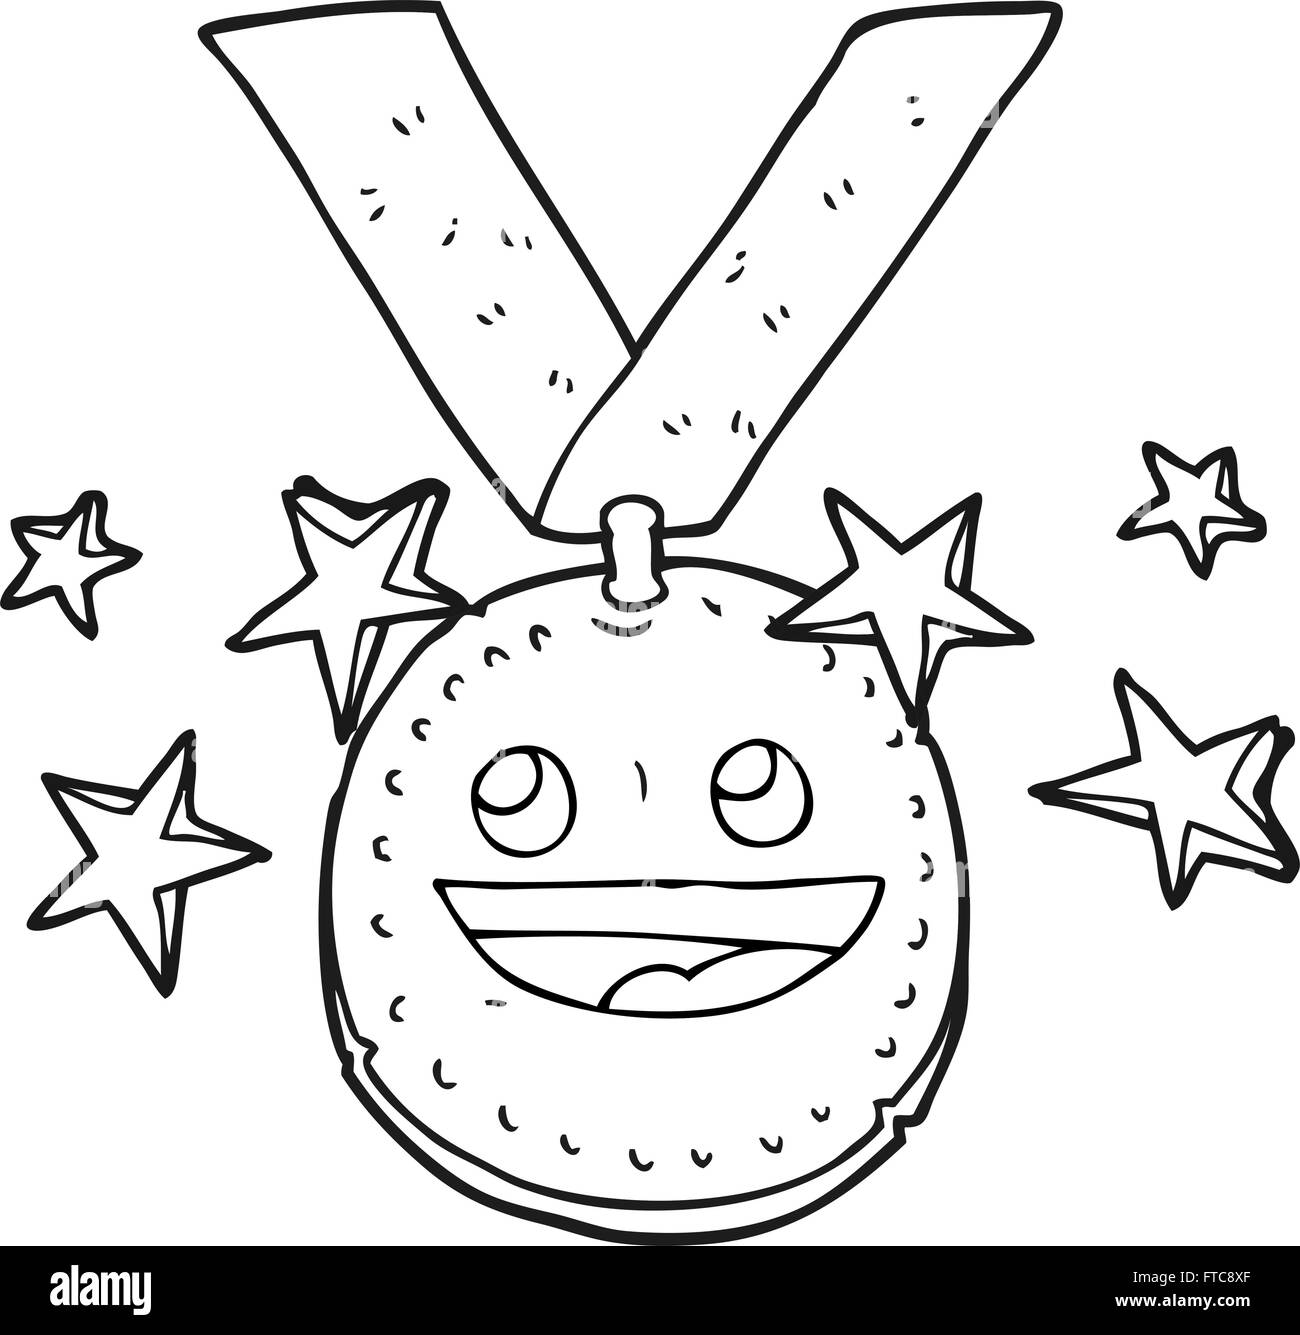 freehand drawn black and white cartoon happy sports medal Stock Vector